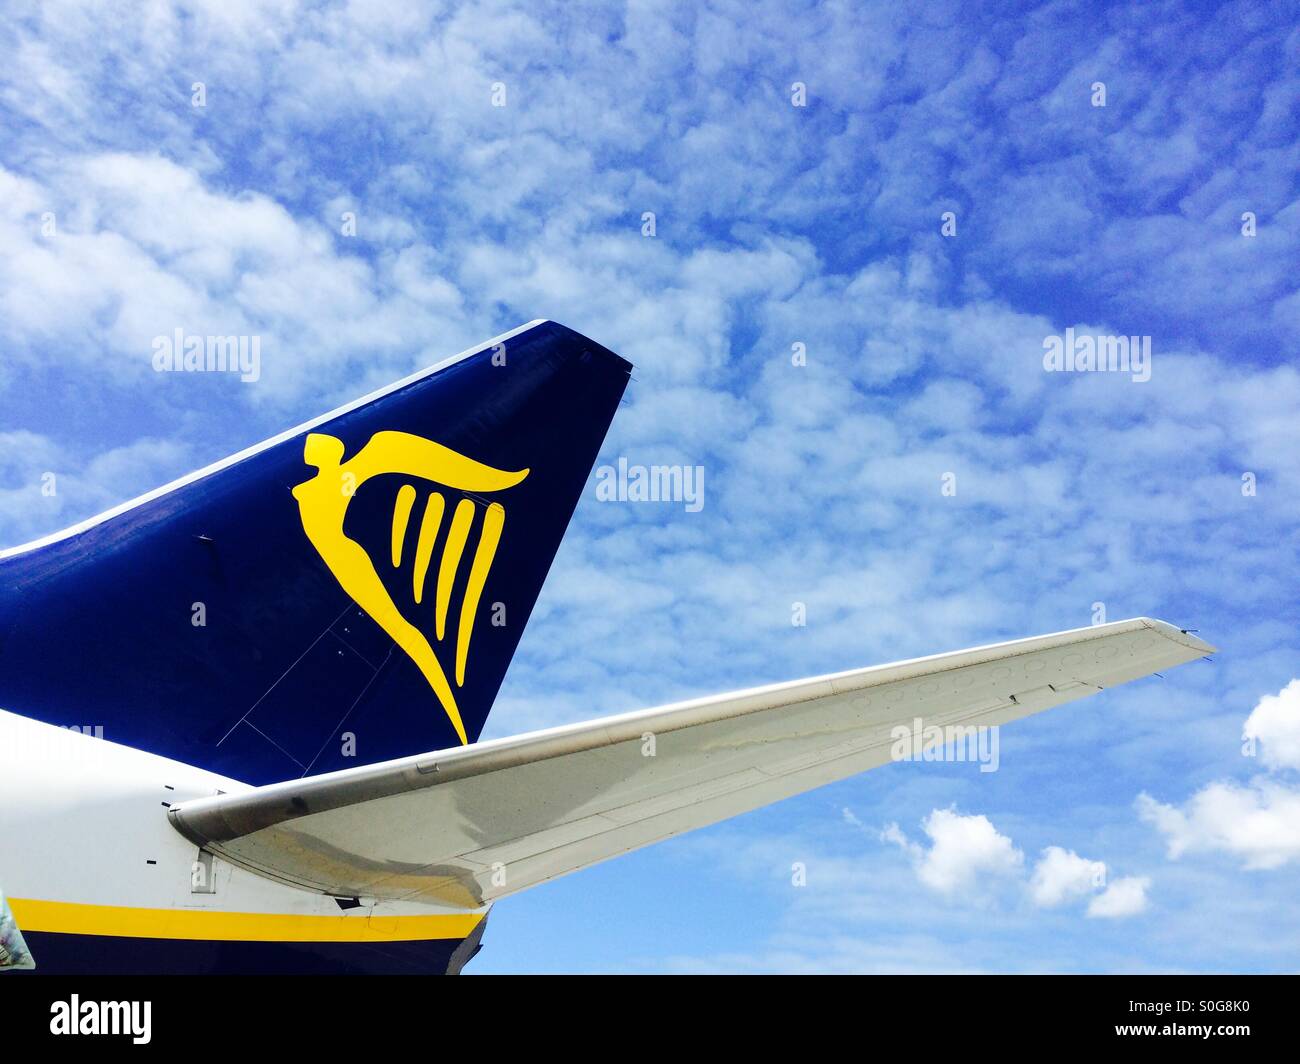 Tail of a RyanAir plane against blue sky. Stock Photo